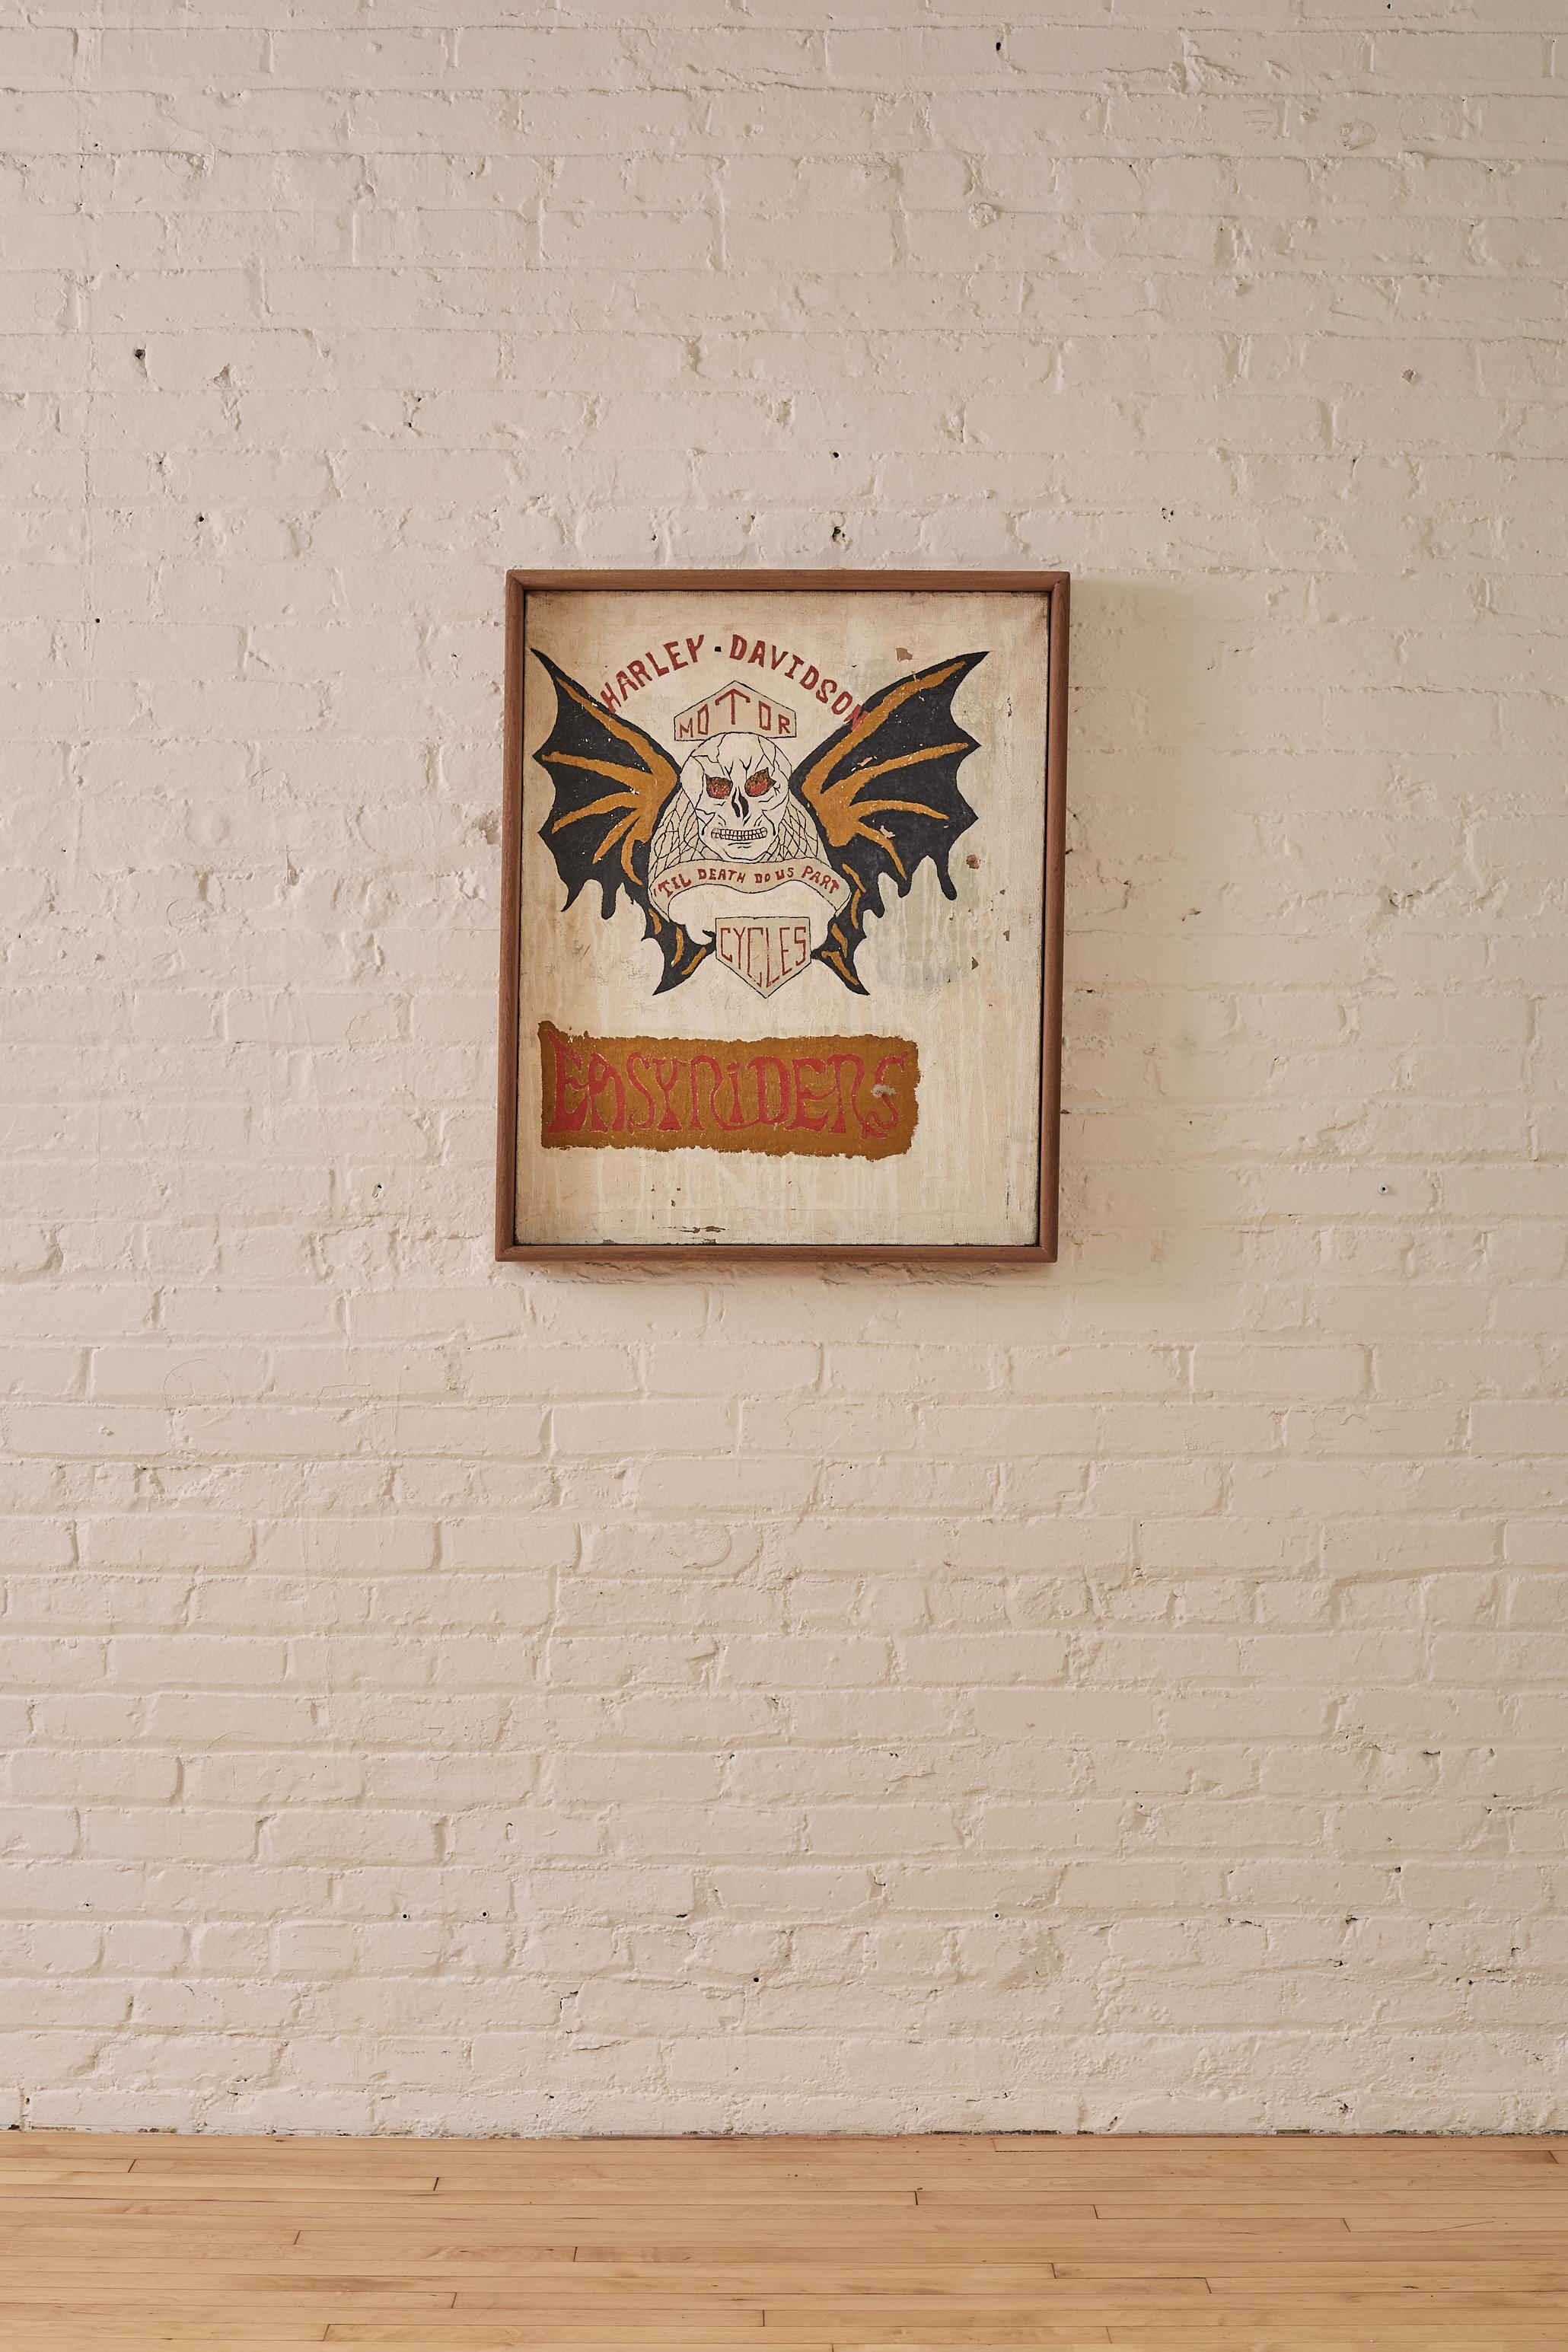 Harley Davidson, Easy Rider Painting encased within a crafted wooden frame. The focal point of the painting is an alternative take on the iconic skull and bat wing Harley-Davidson, Easyrider emblem. The juxtaposition of the biker culture and the